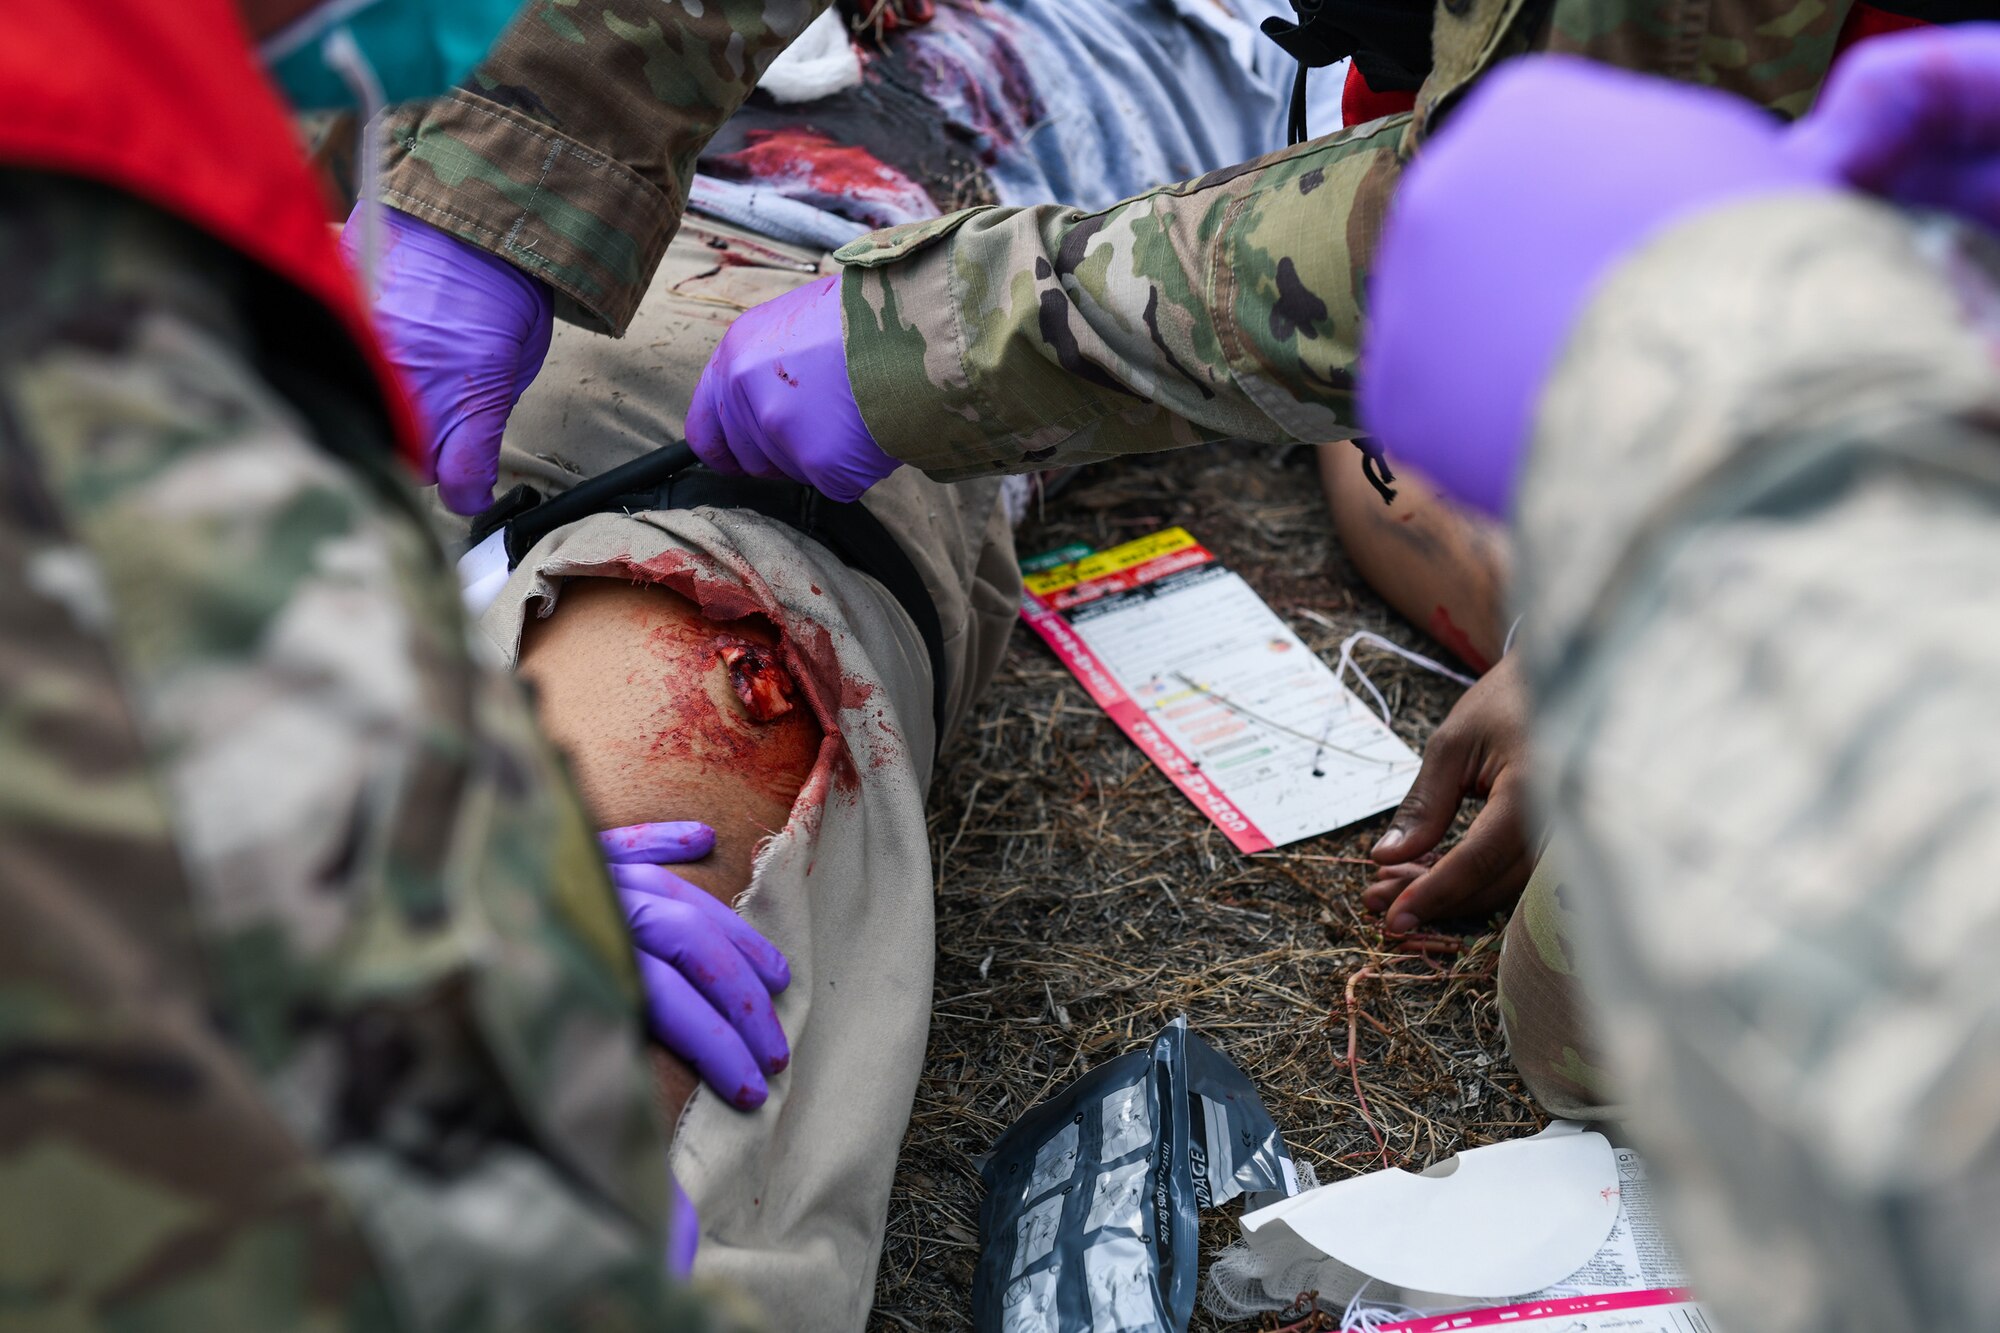 Airmen from the 460th Medical Group apply a tourniquet to a wounded patient during the Ready Eagle exercise where a simulated explosion occurred Sept. 18, 2020, at the Air Reserve Personnel Center on Buckley Air Force Base, Colo.